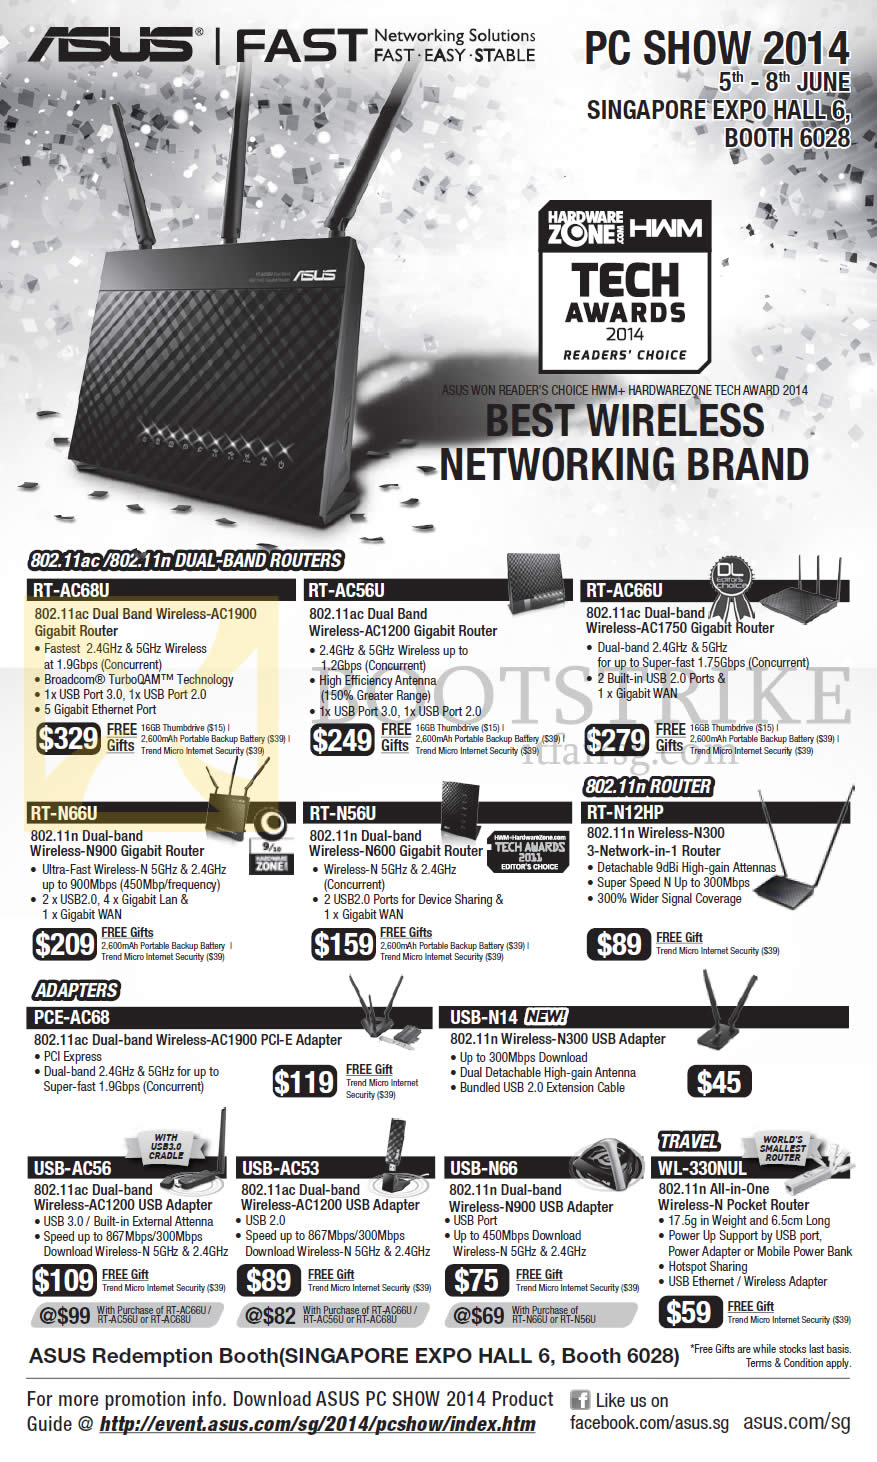 PC SHOW 2014 price list image brochure of ASUS Networking Wireless Adapters, Routers, RT-AC68U, AC56U, AC66U, N66U, N56U, N12HP, PCE-AC68, USB-N14, AC56, AC53, N66, WL-330NUL